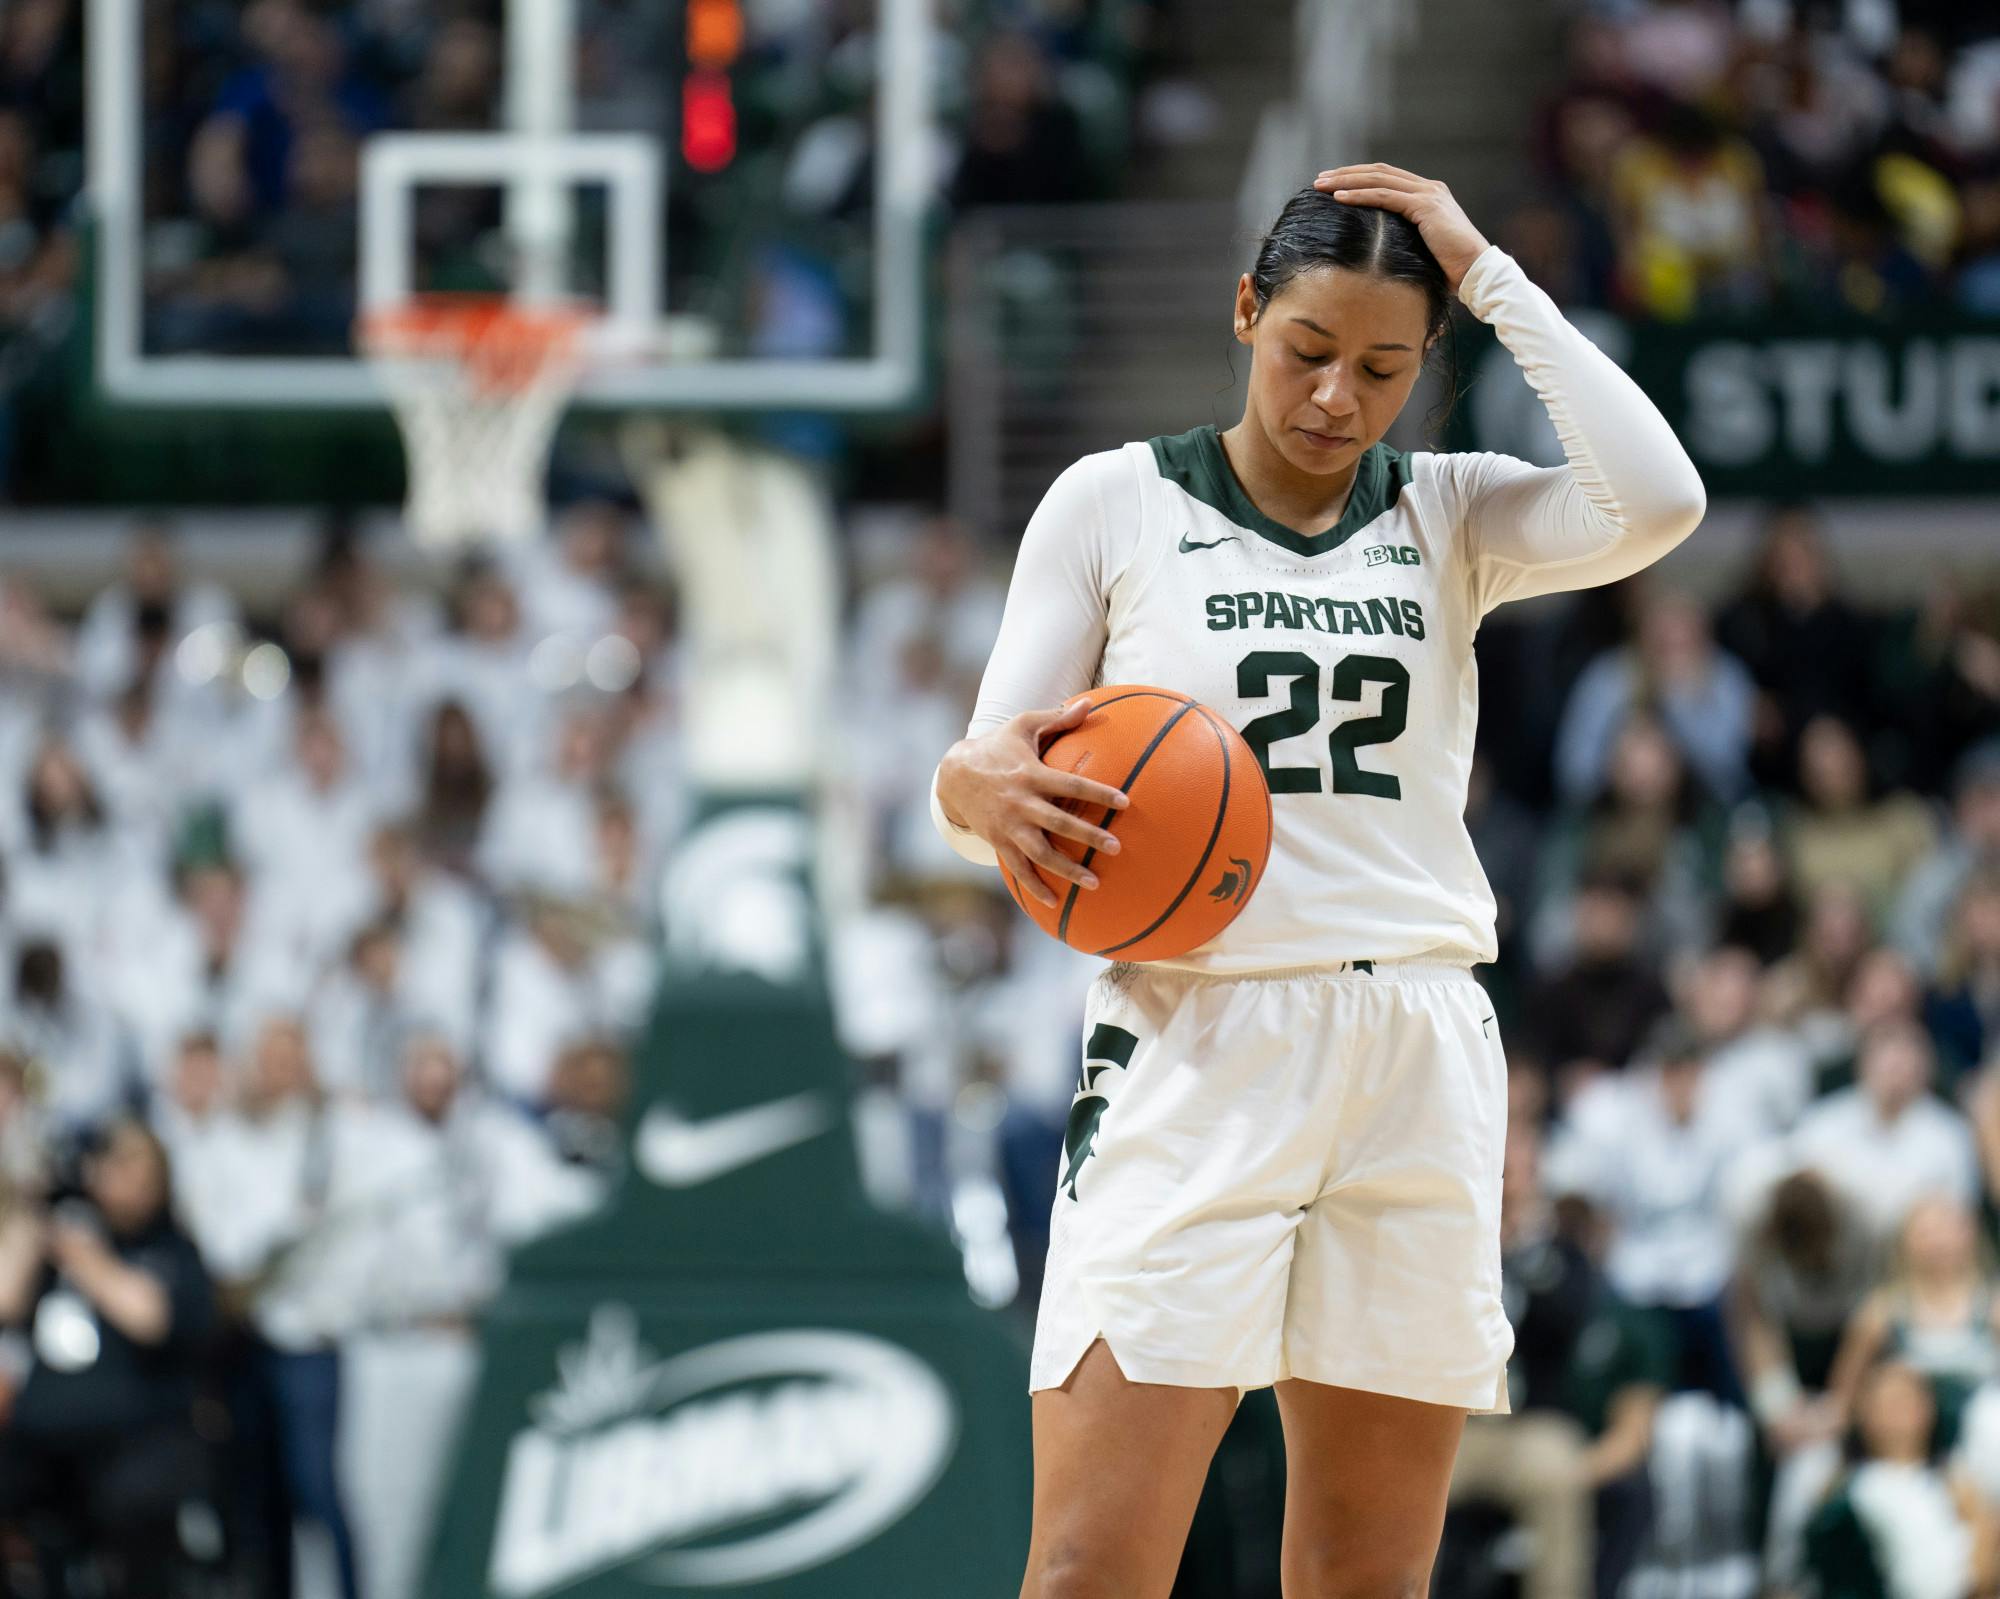 <p>Senior Guard Moira Joiner takes a breather before finishing out a gritty game against the University of Michigan at the Breslin Center on Sunday, Feb. 5, 2023. The Spartans lost 77-67 after leading the Wolverines for the entire first half.</p>